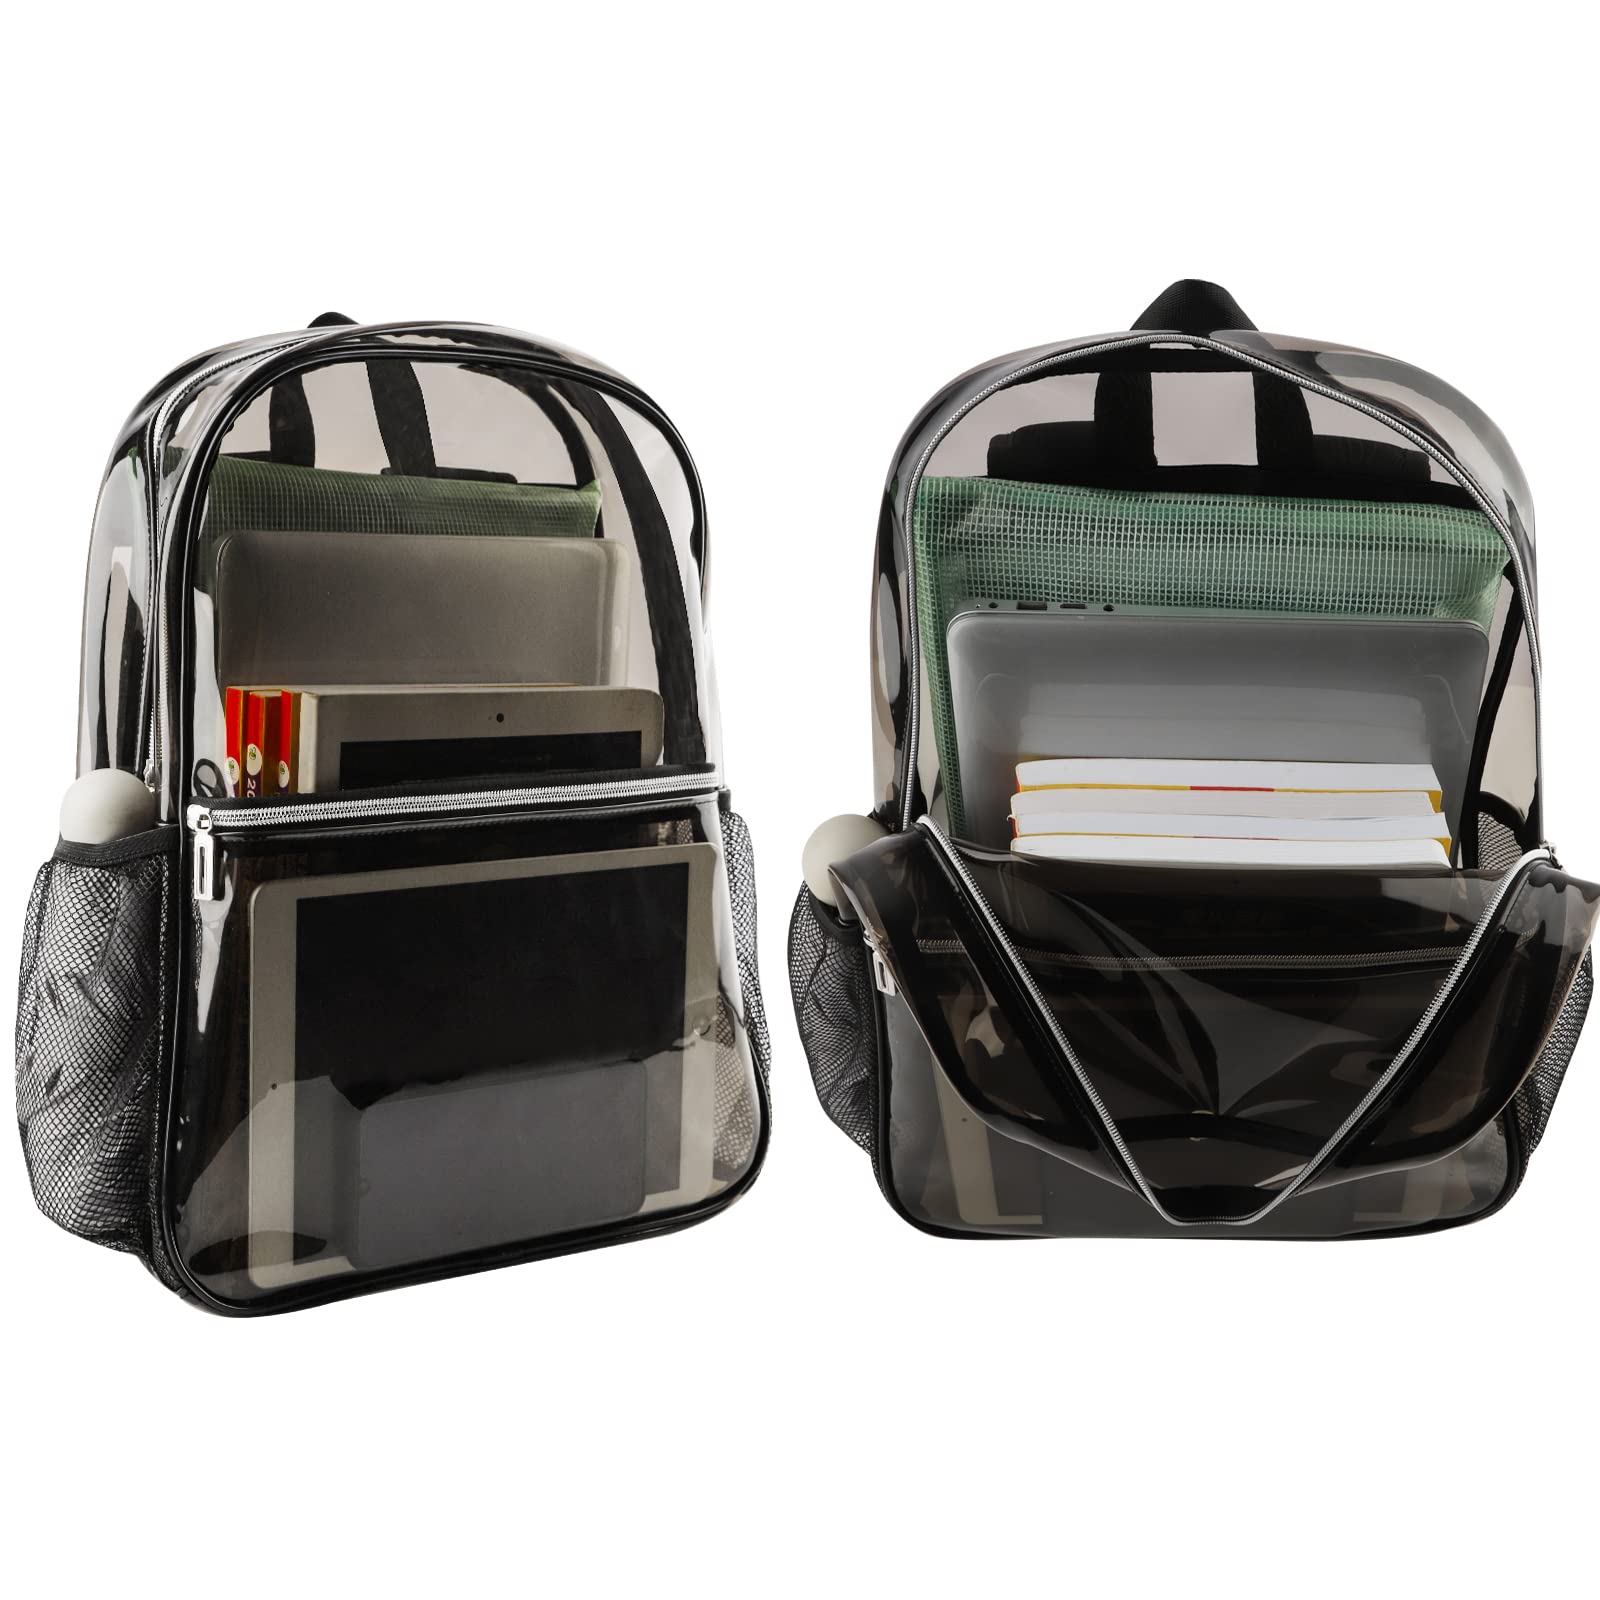 Neurora Clear Backpack Heavy Duty TPU Transparent Backpack for School,Sports,Work,Security Travel,College.